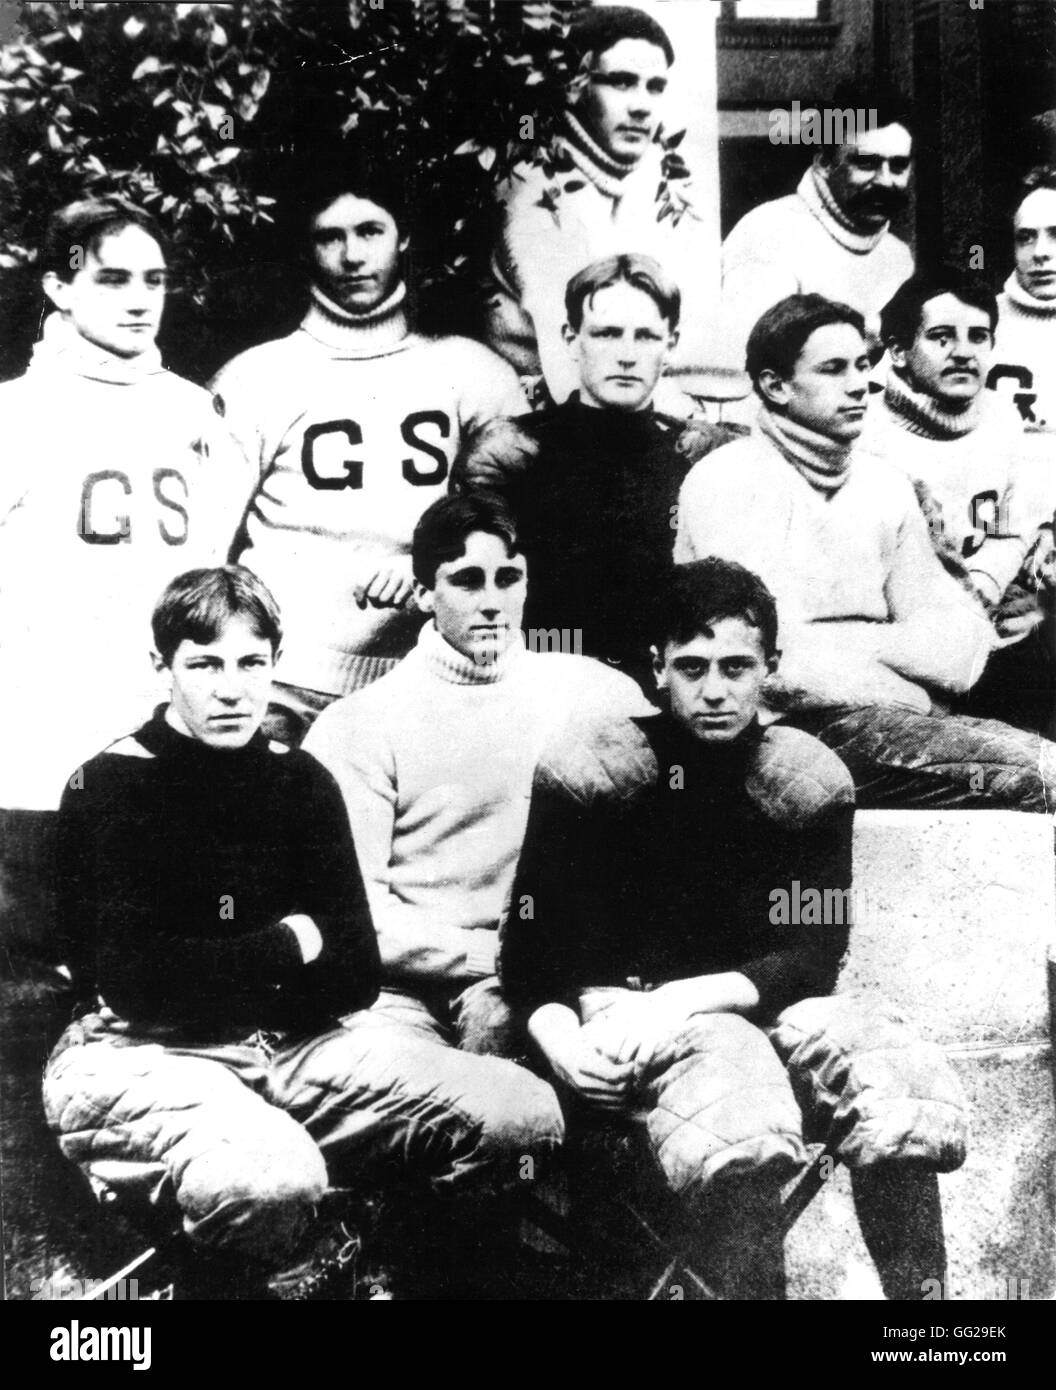 Franklin Delano Roosevelt (in the middle, first row), with the football team of his school, Groton prep school